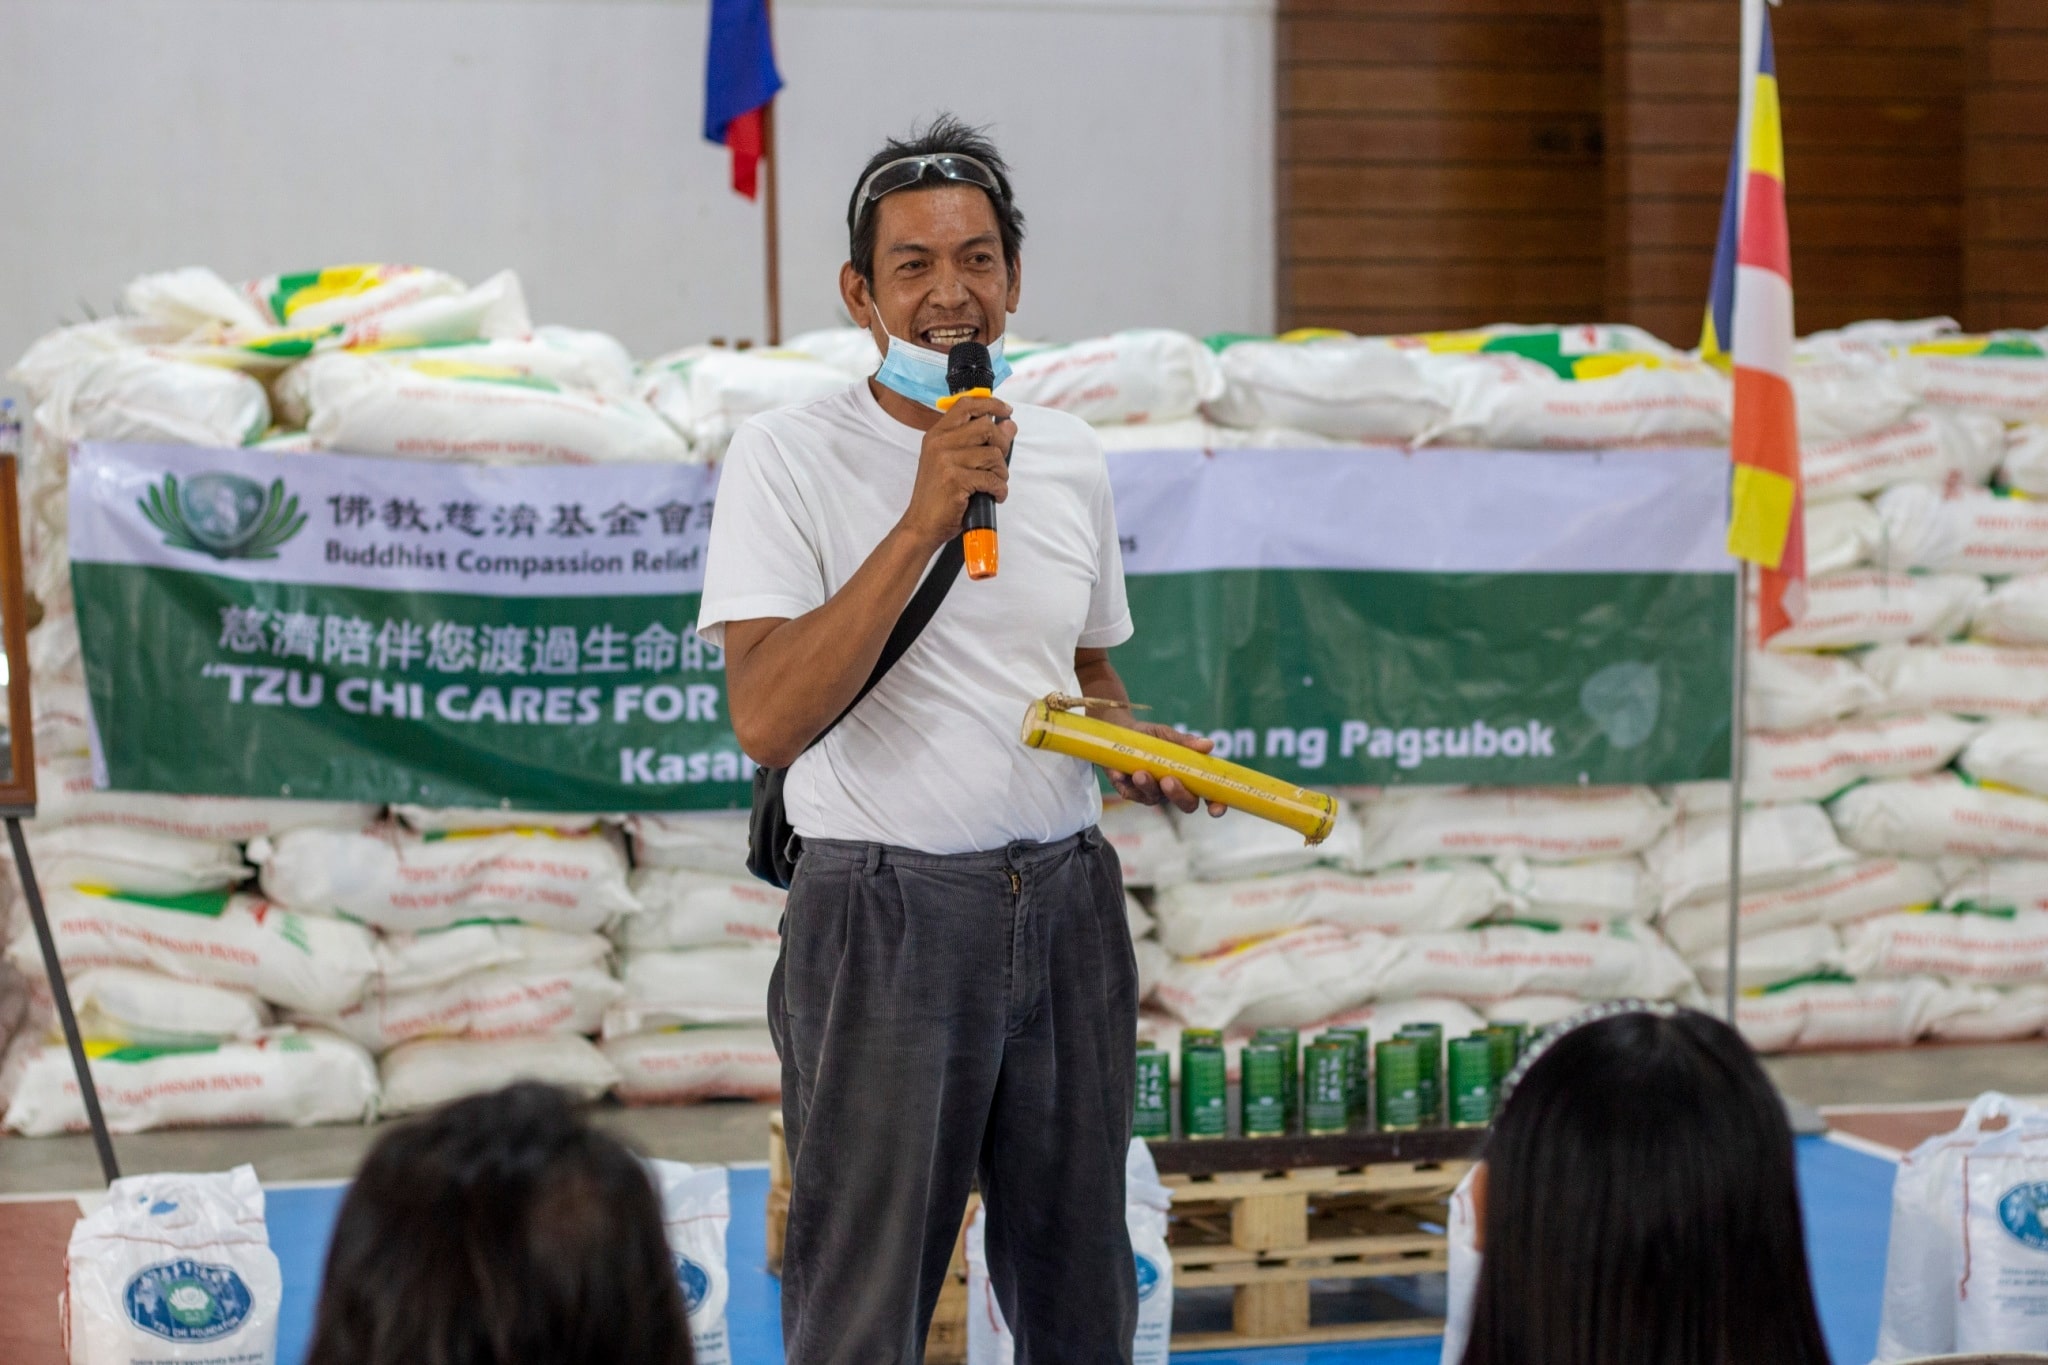 With his bamboo coin bank in his hand, Tony David shares his experience as a medical assistance beneficiary of Tzu Chi Foundation.【Photo by Matt Serrano】